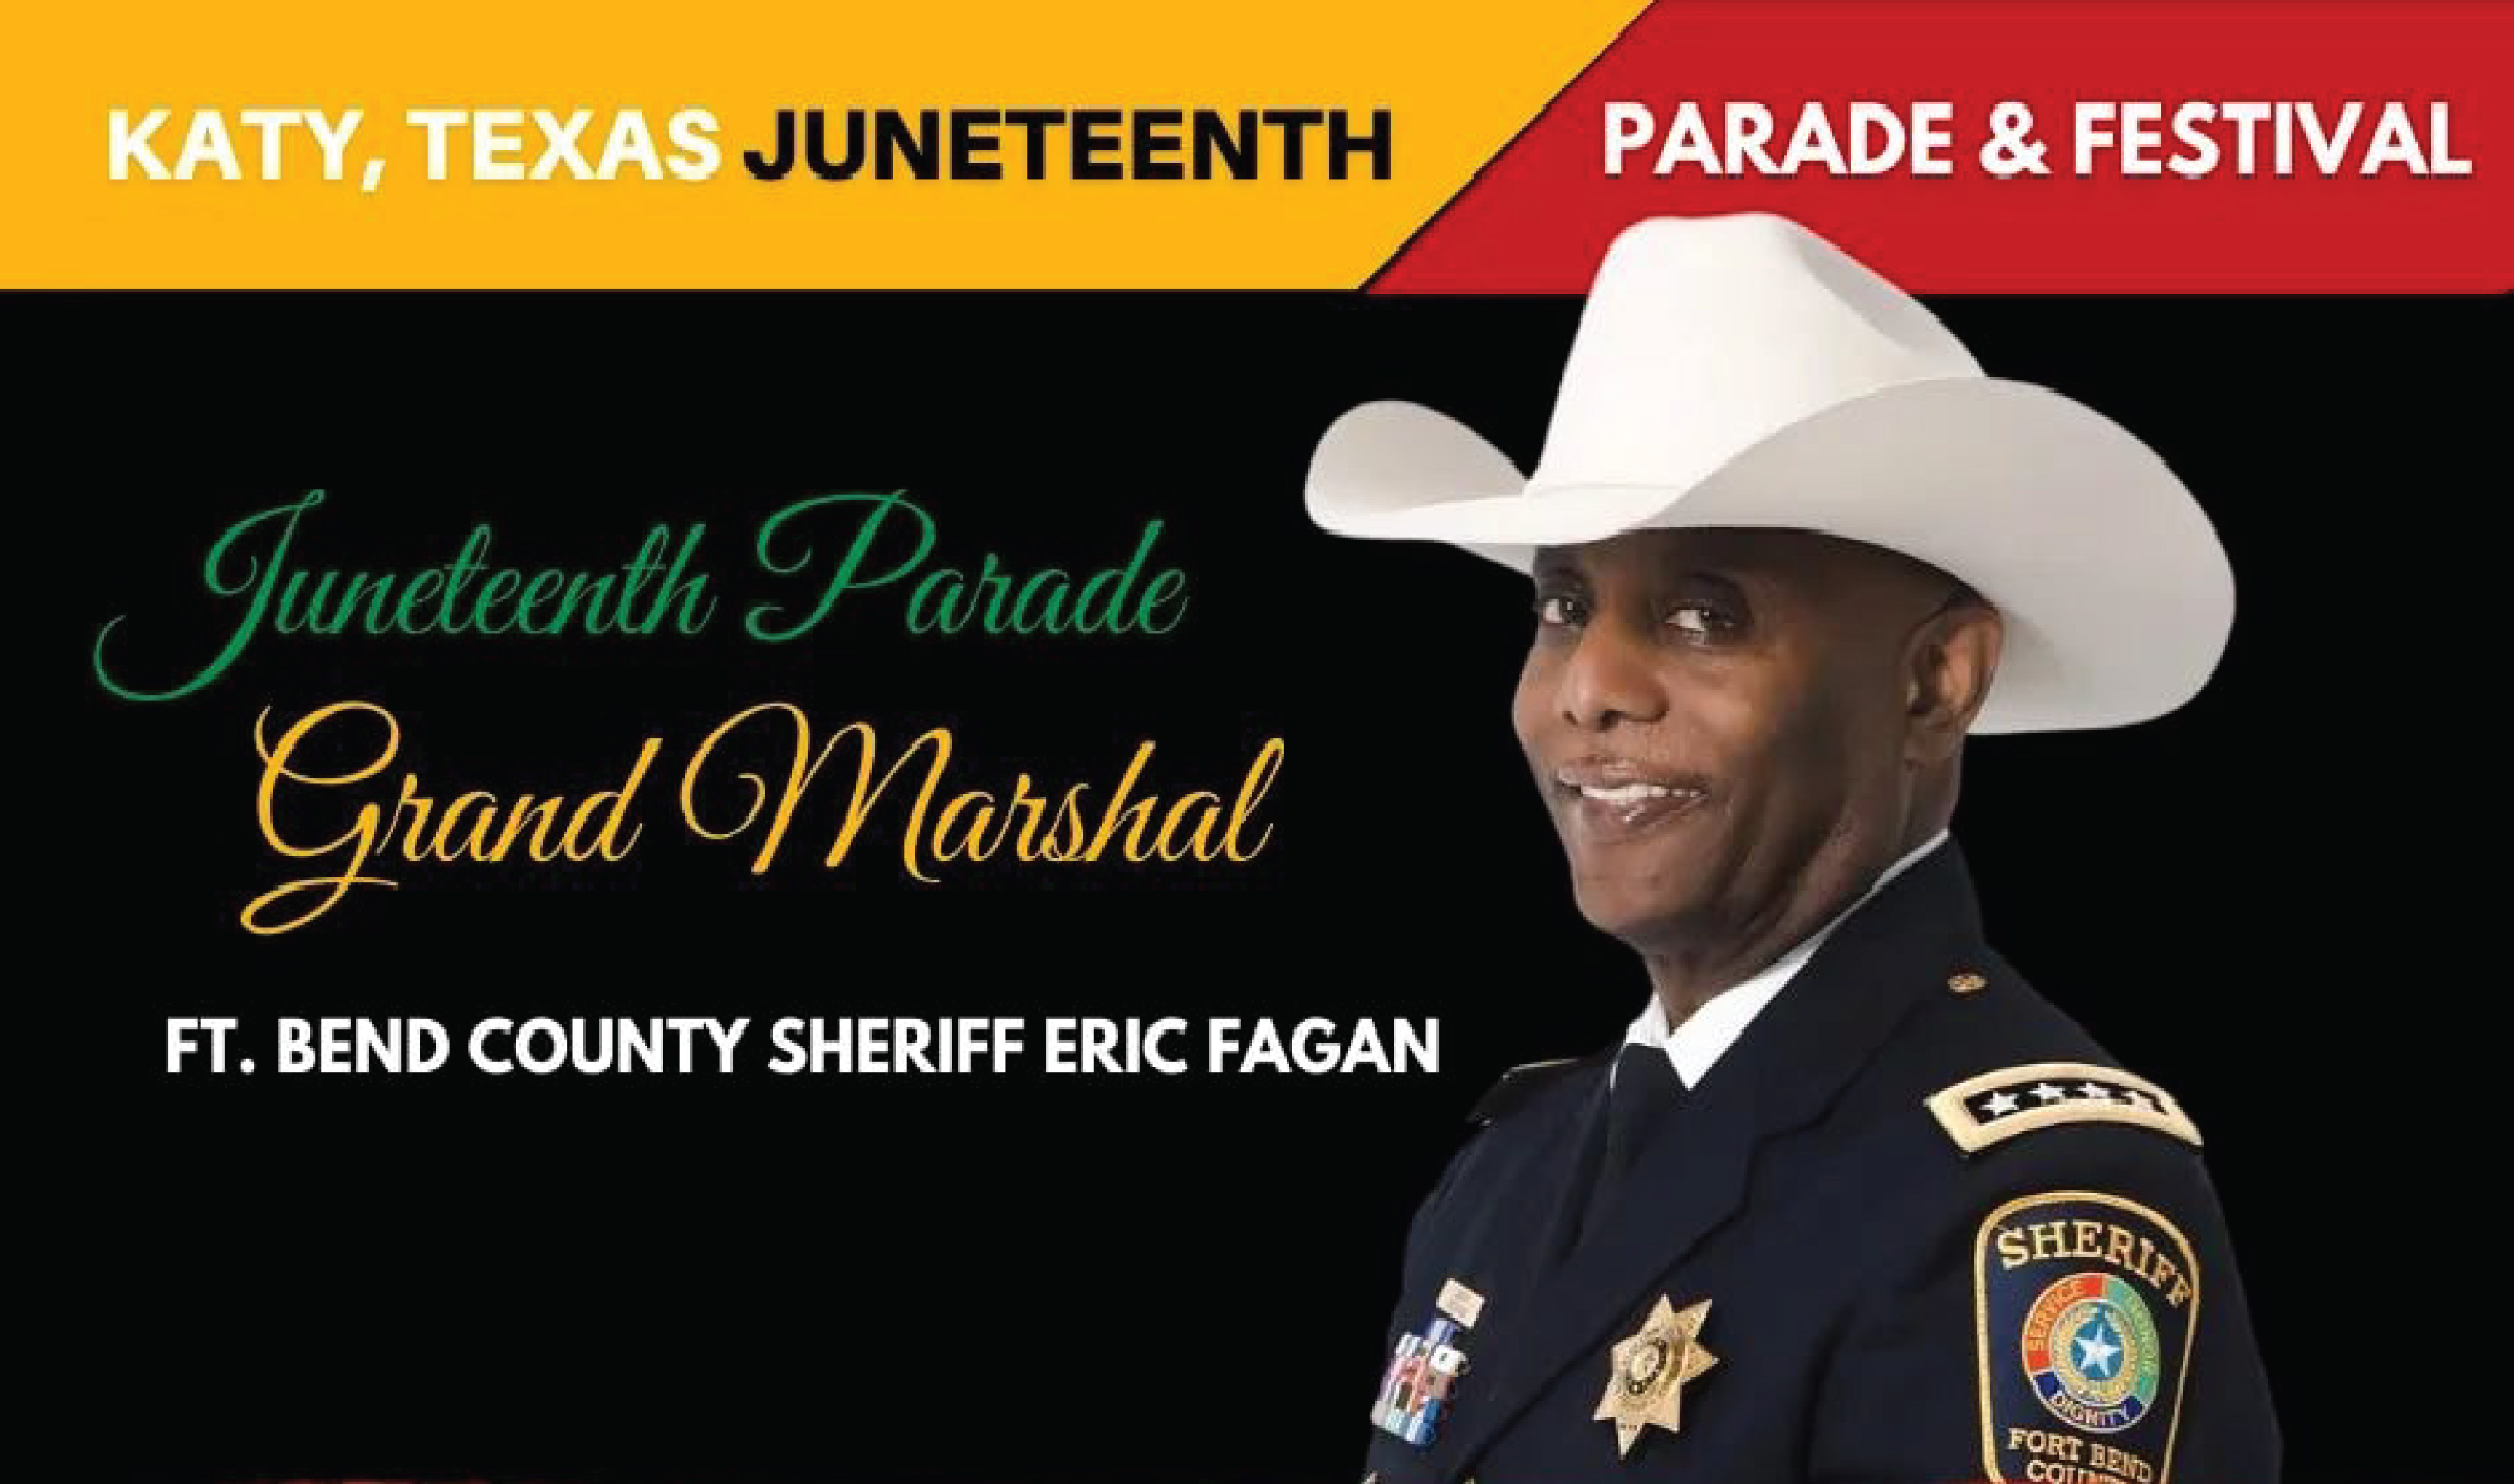 Celebrate at the First Annual Katy, Texas Parade